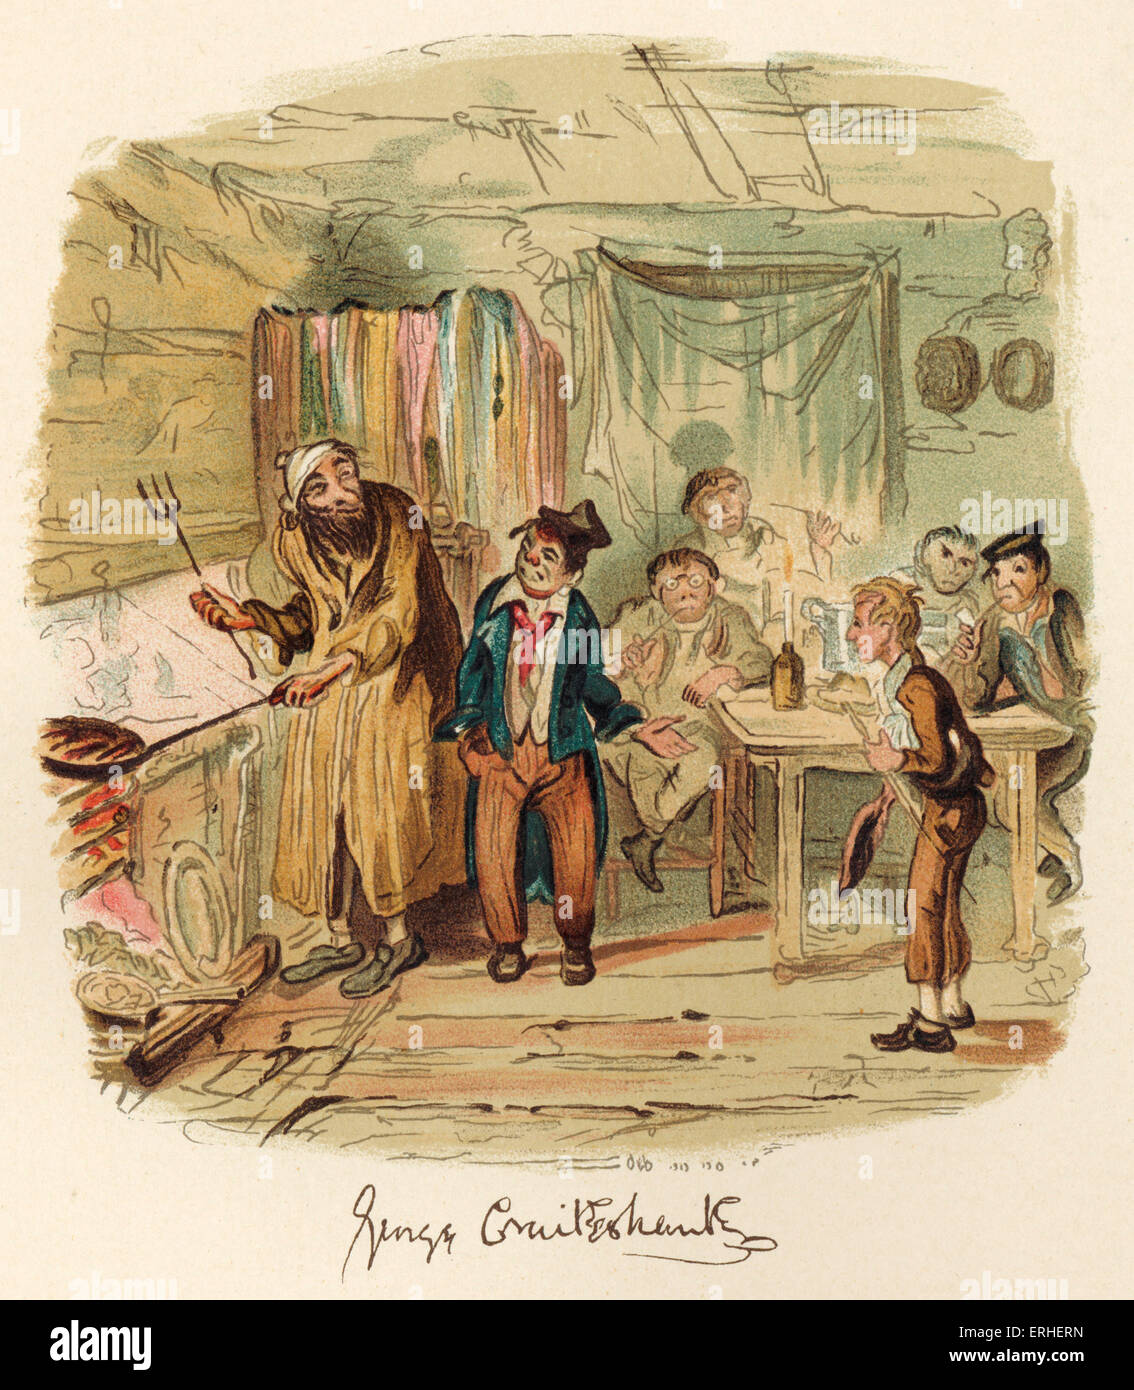 characters of oliver twist written by charles dickens